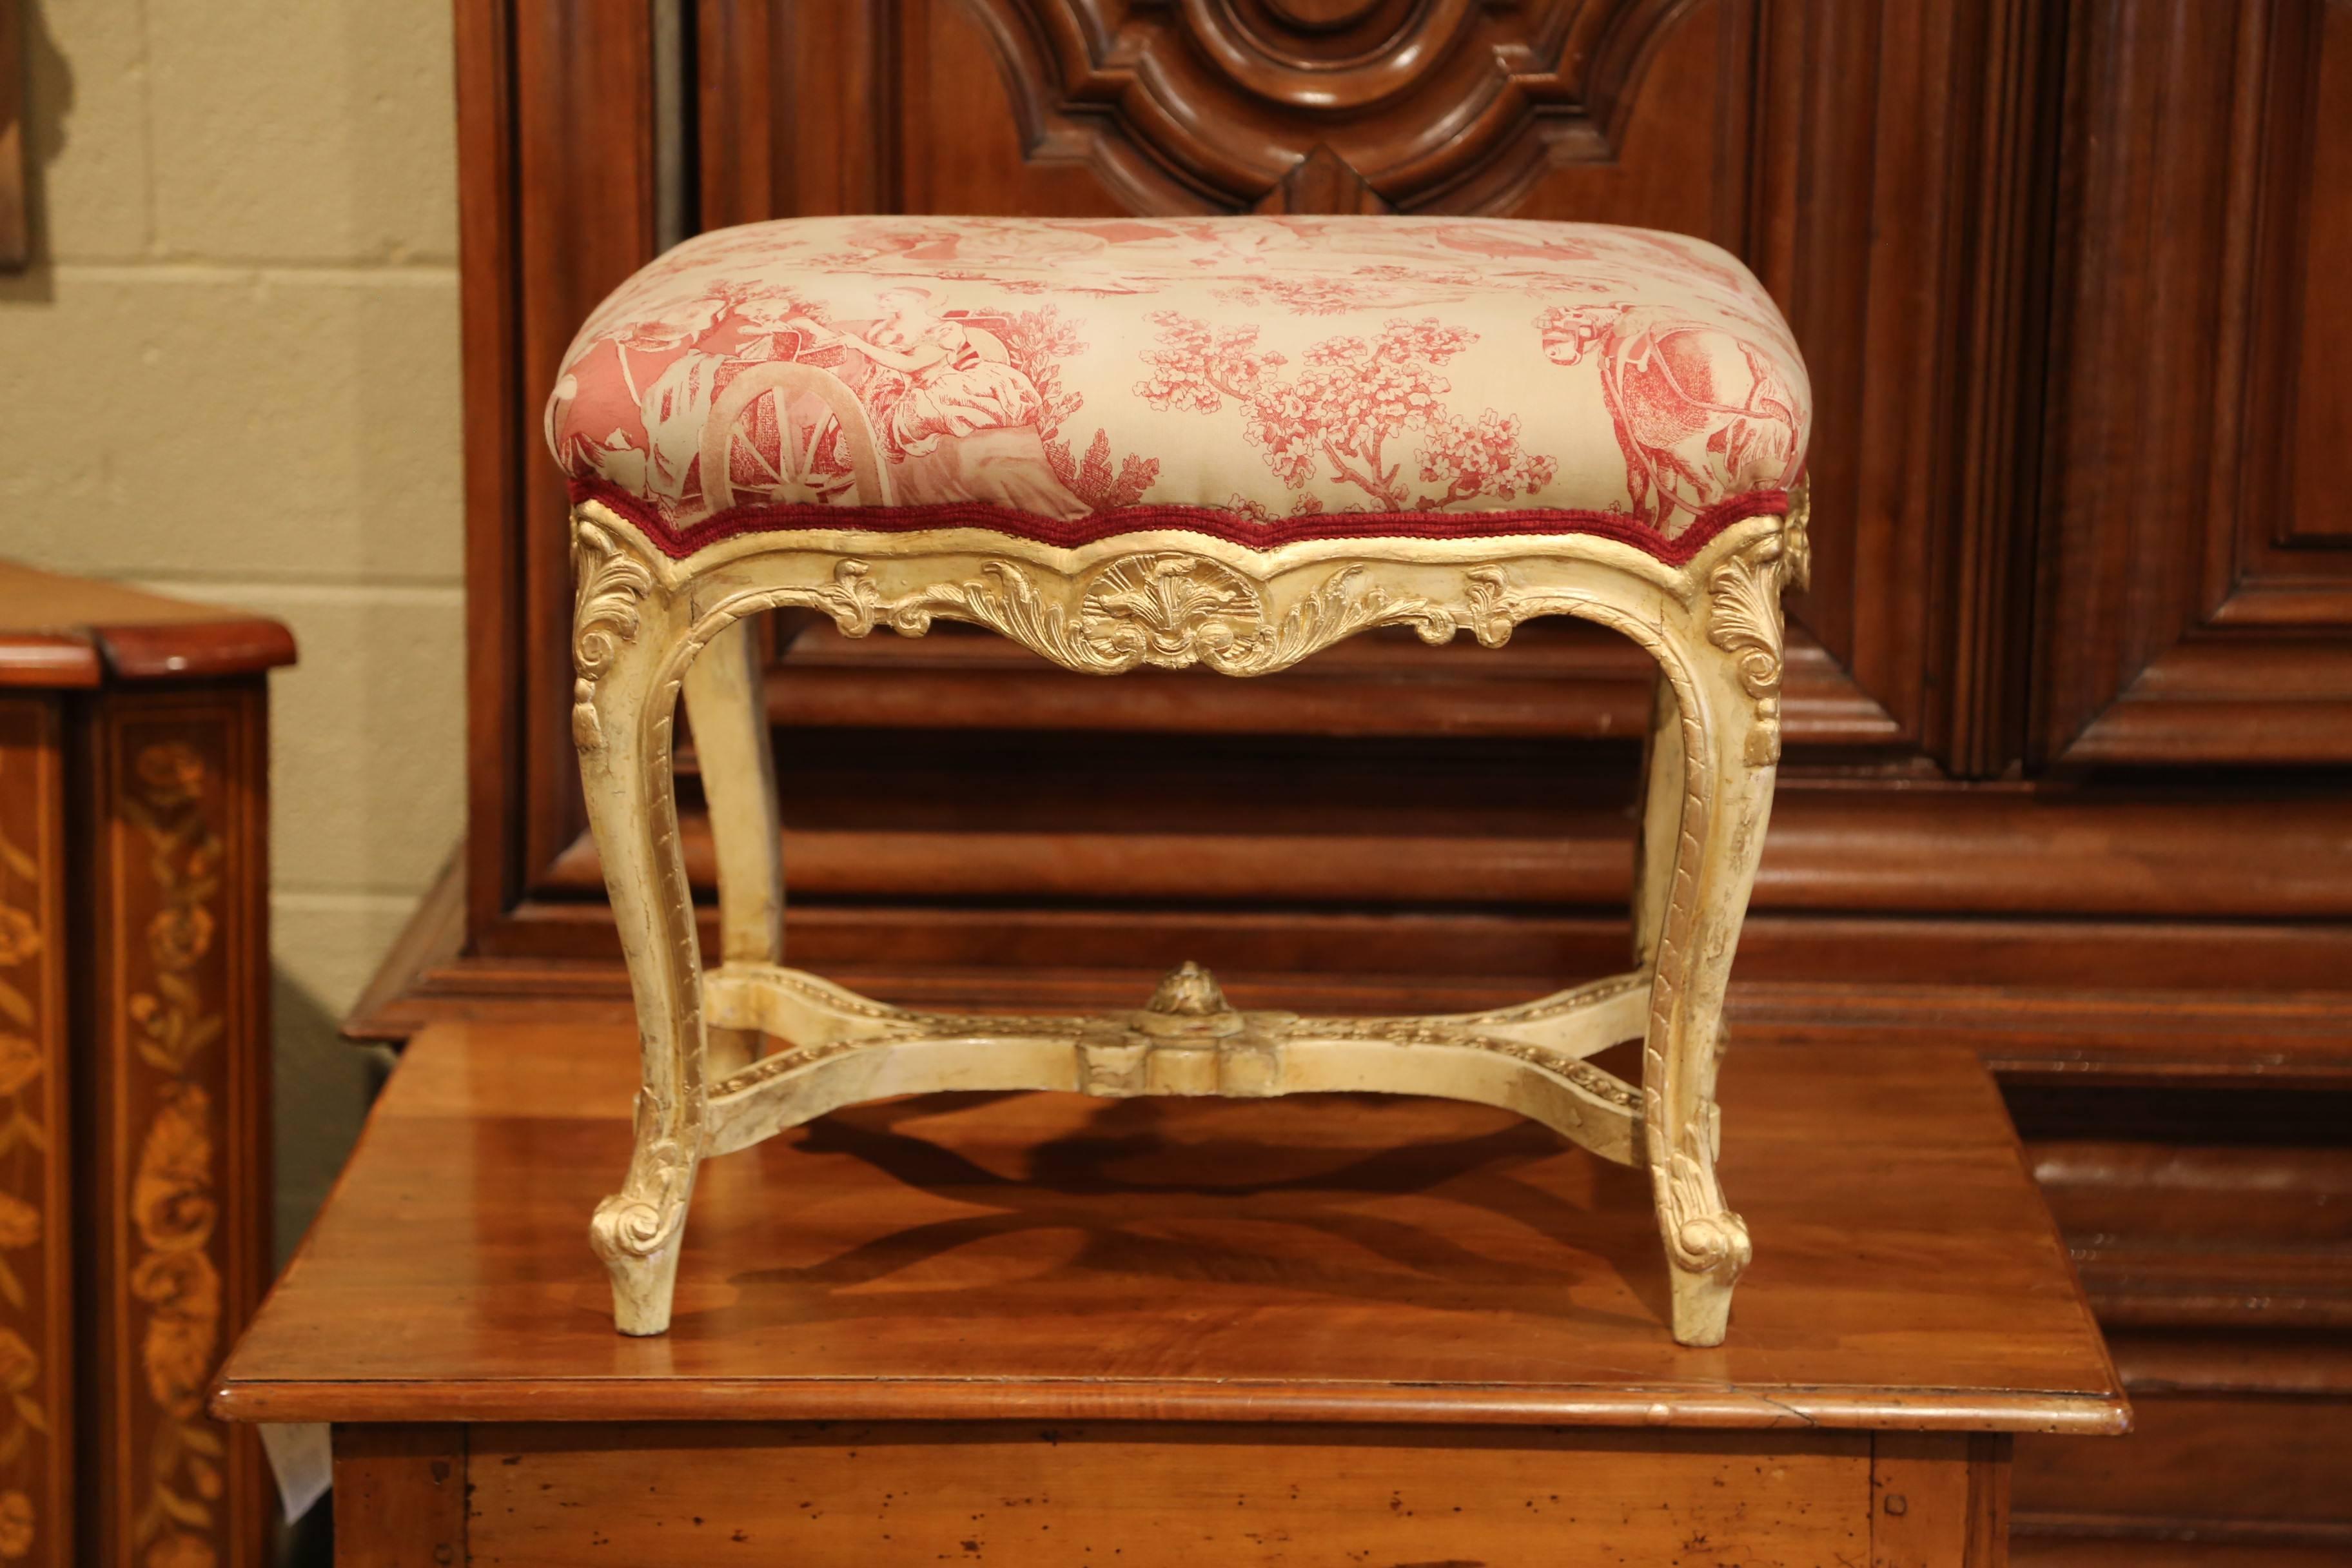 Colorful and elegant, this antique stool will add a charming, French character to your home. Crafted in France, circa 1870, the hand carved stool features intricate carvings including shell and acanthus leaf decor on the scalloped apron, over four